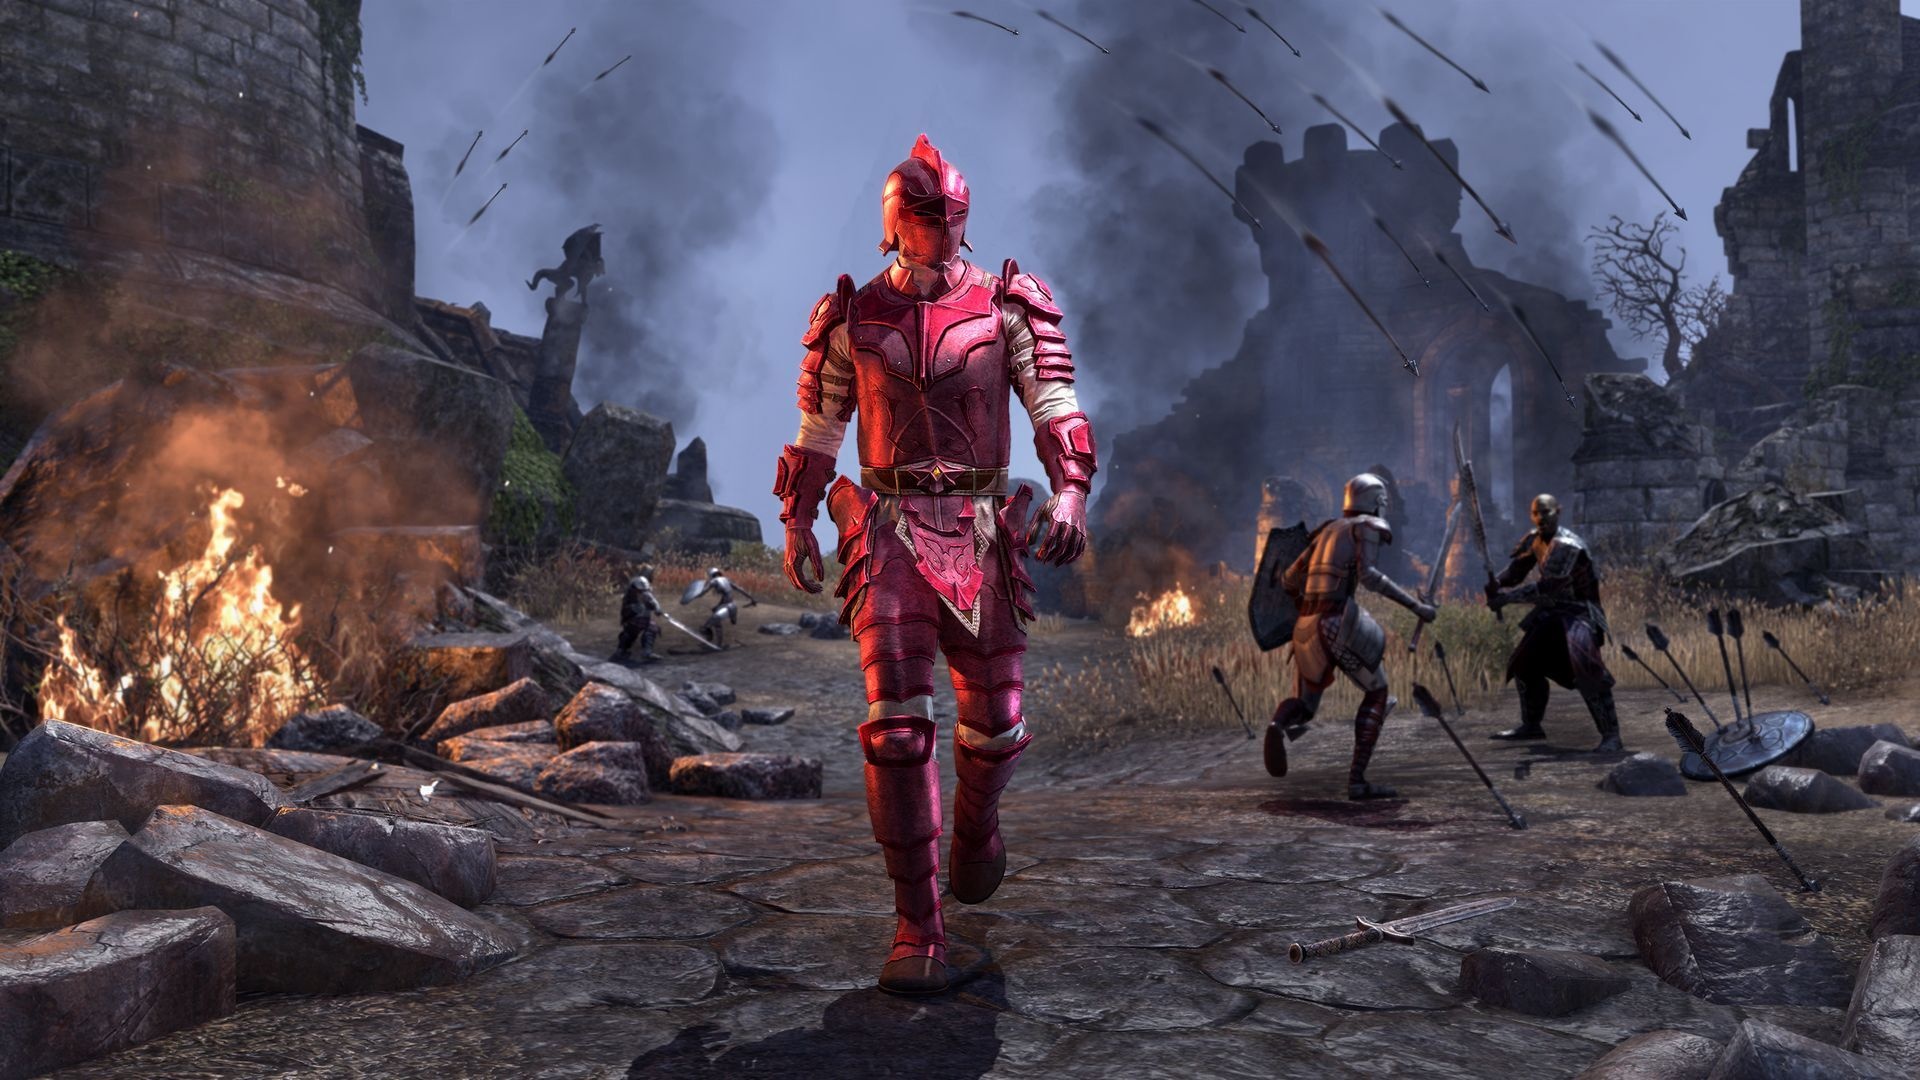 Protect the Legacy of the Bretons in The Elder Scrolls Online: High Isle -  Xbox Wire